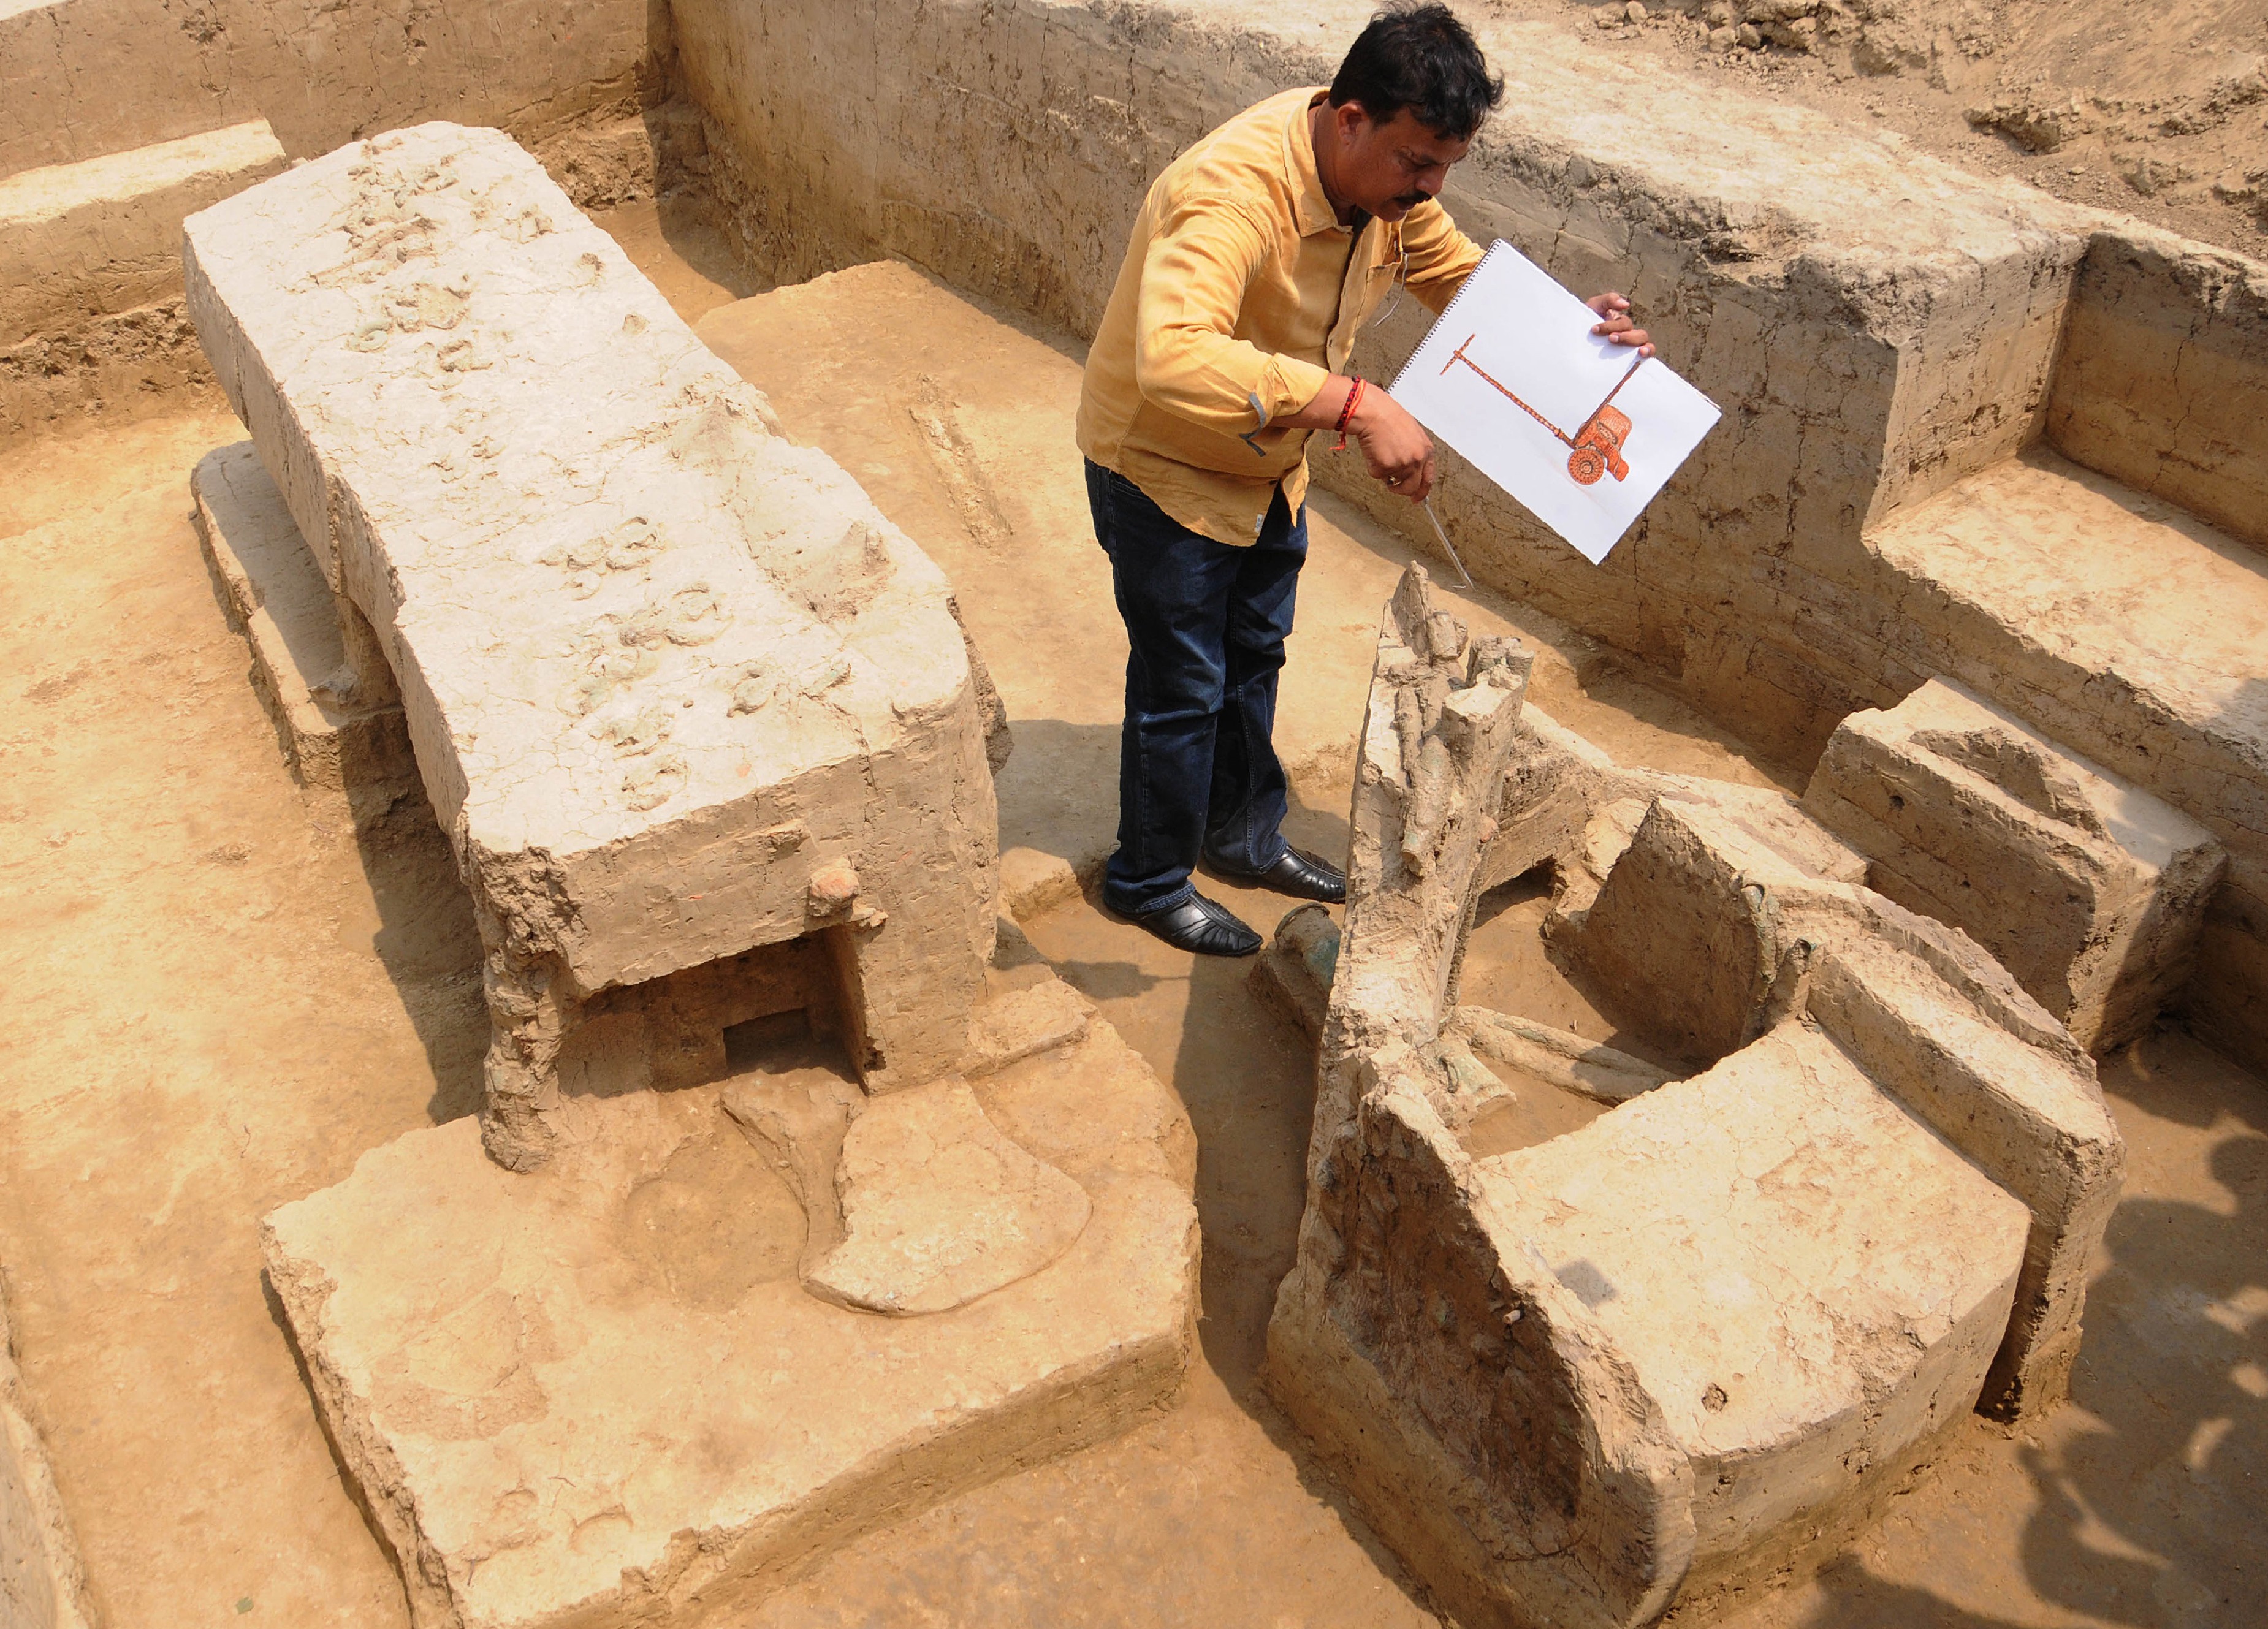 An archaeologist looks at the remains of a chariot belonging to the Indus Valley civilisation at an excavation site in Baghpat. Photo: AFP